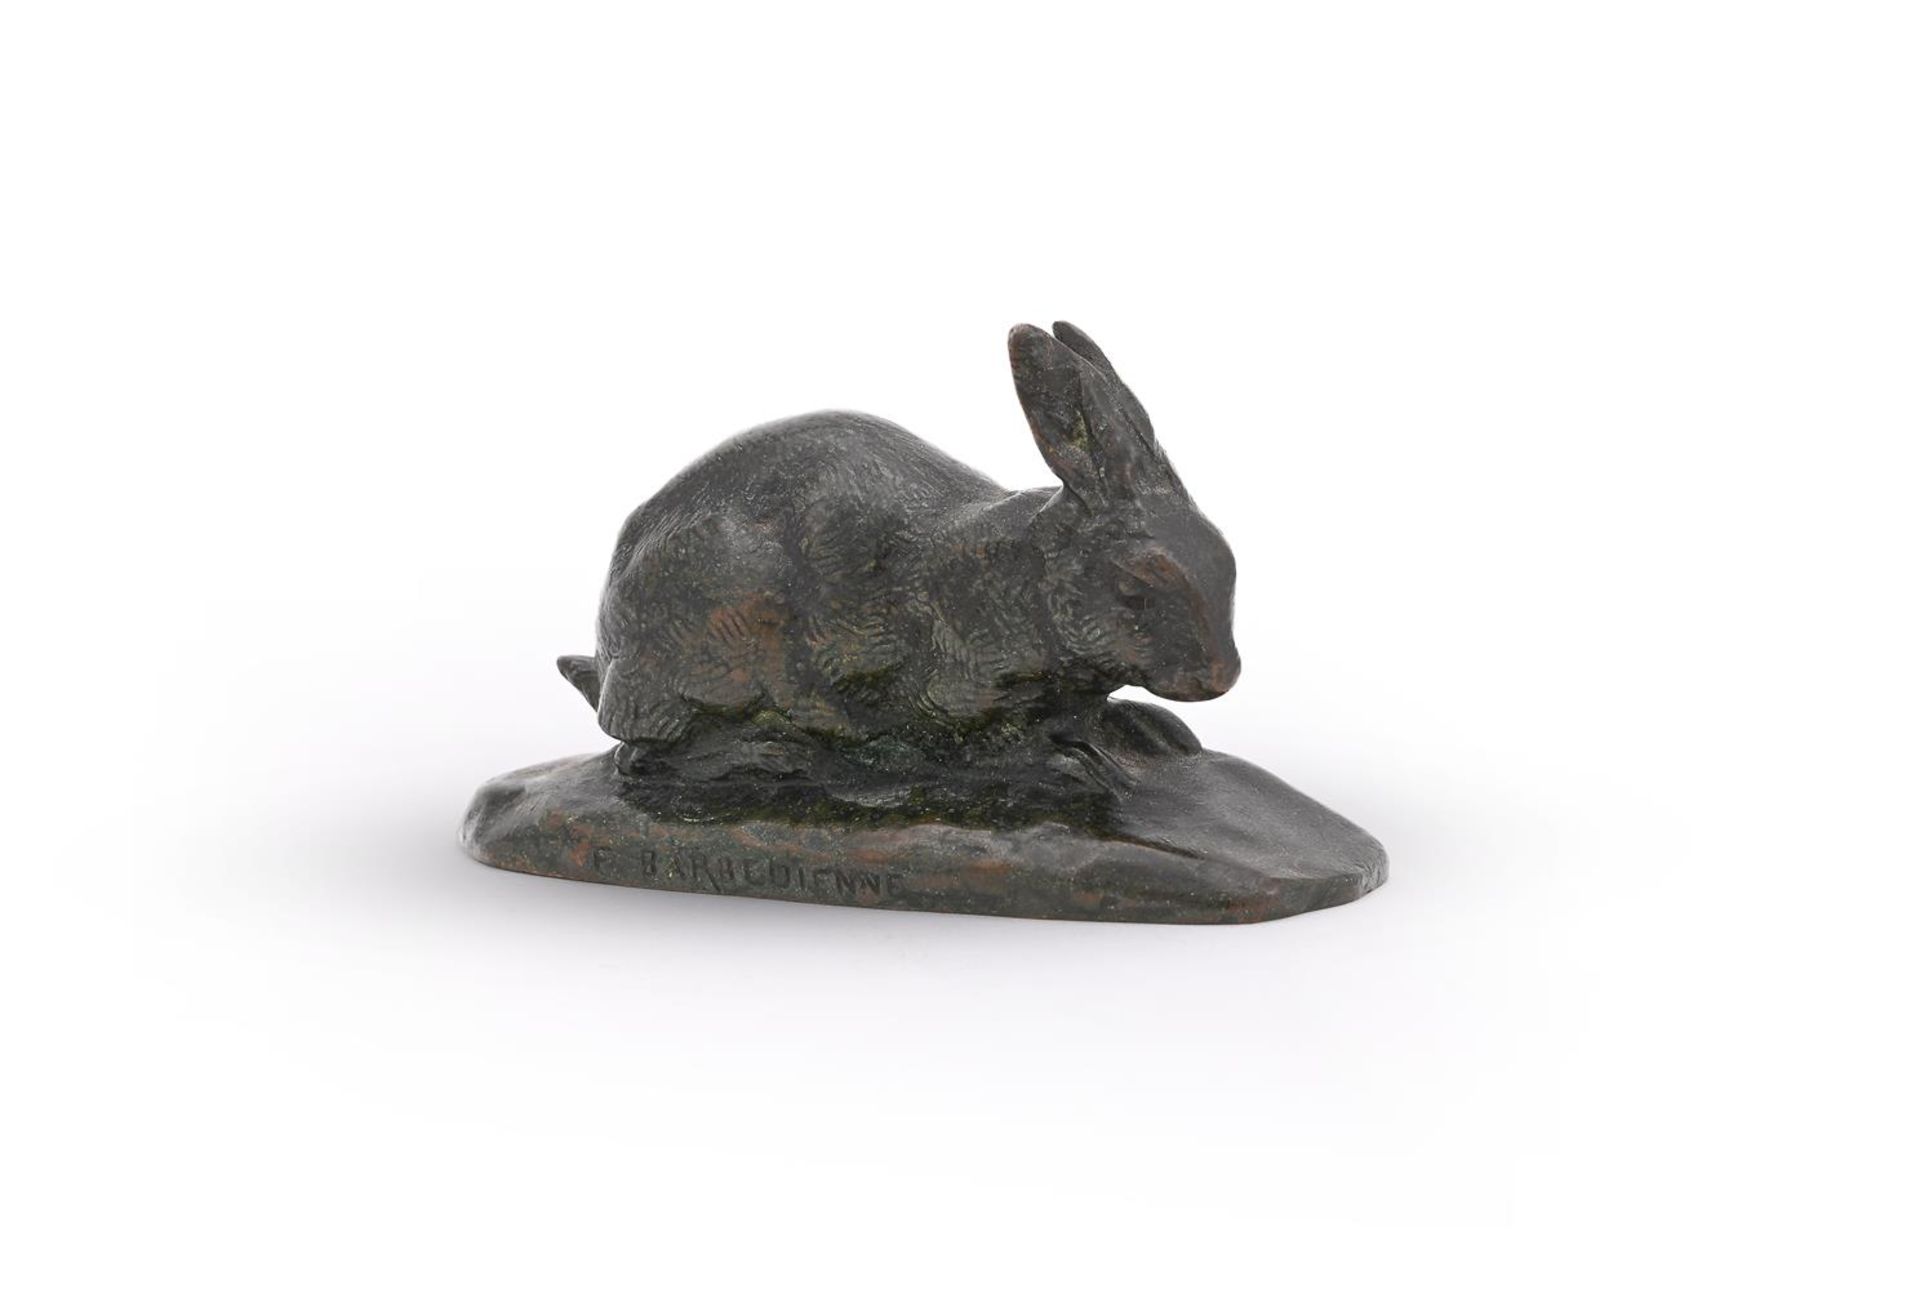 ANTOINE-LOUIS BARYE (FRENCH, 1795-1875), A BRONZE MODEL OF A CROUCHING RABBIT - Image 3 of 5